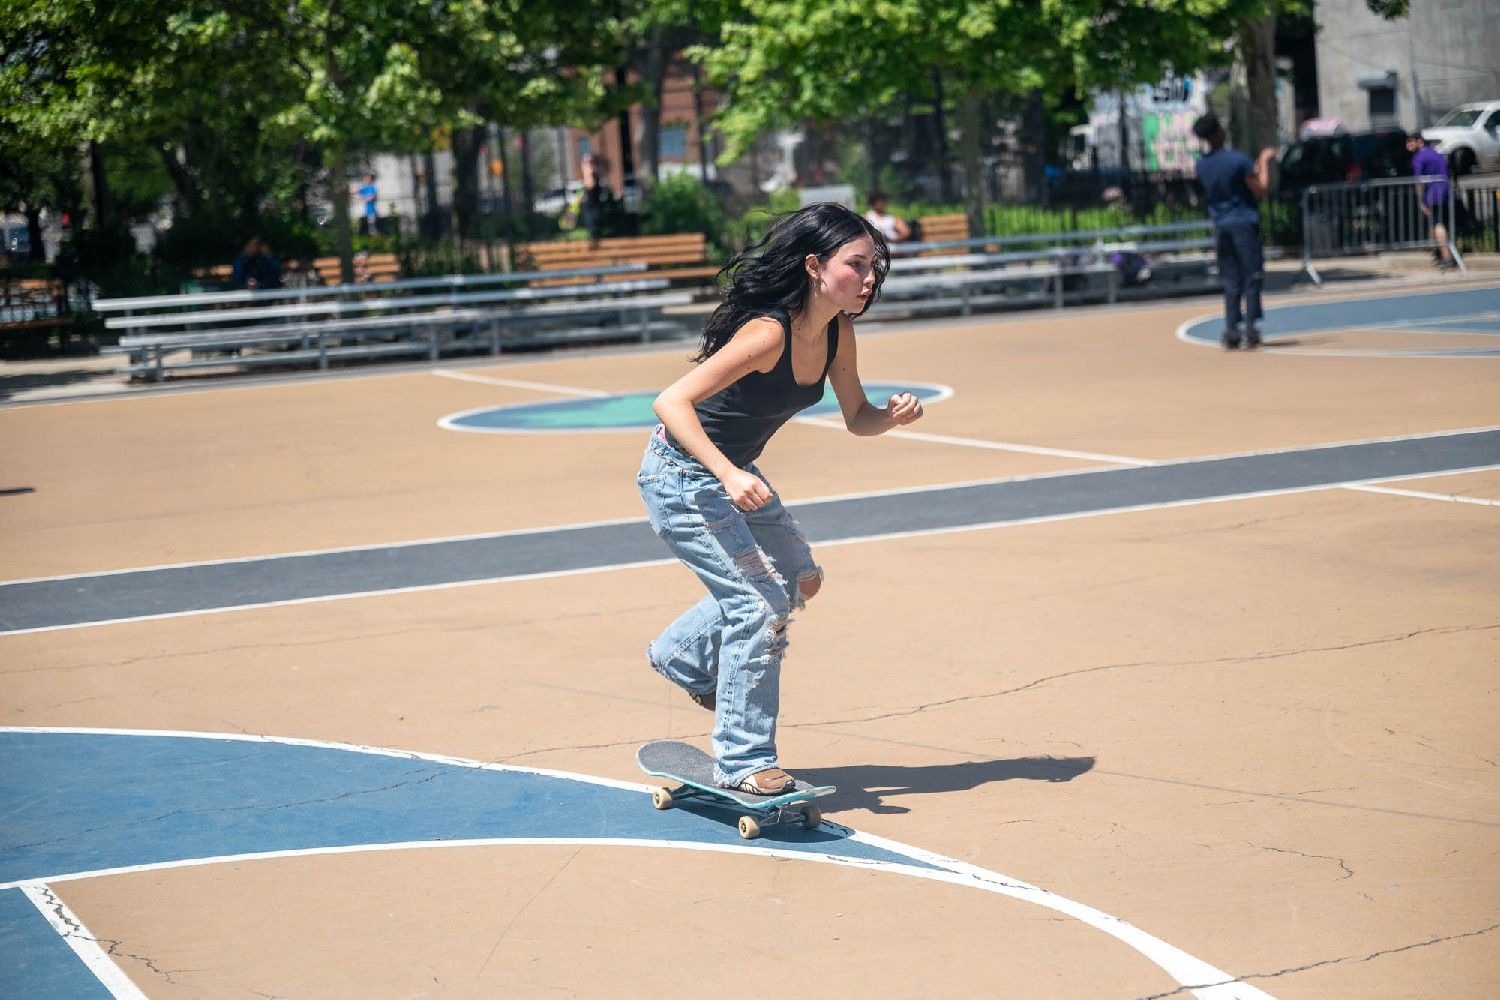 Bryan pushes off the ground with her left foot while skating.